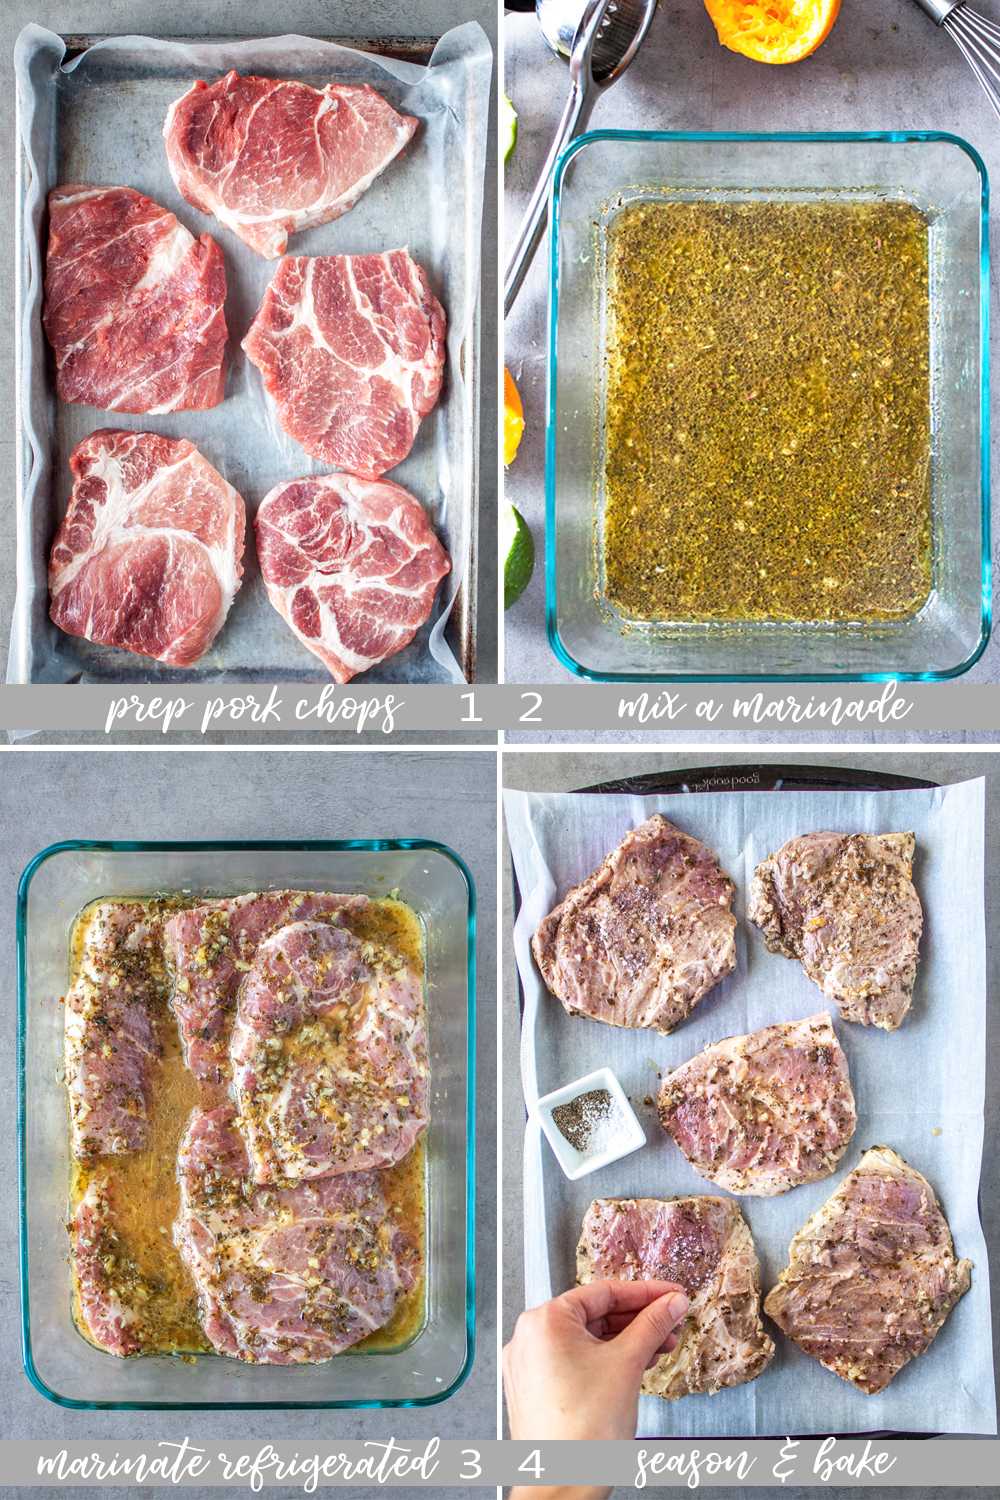 Step by step images showing how to prepare oven bake marinated pork chops. Part 1